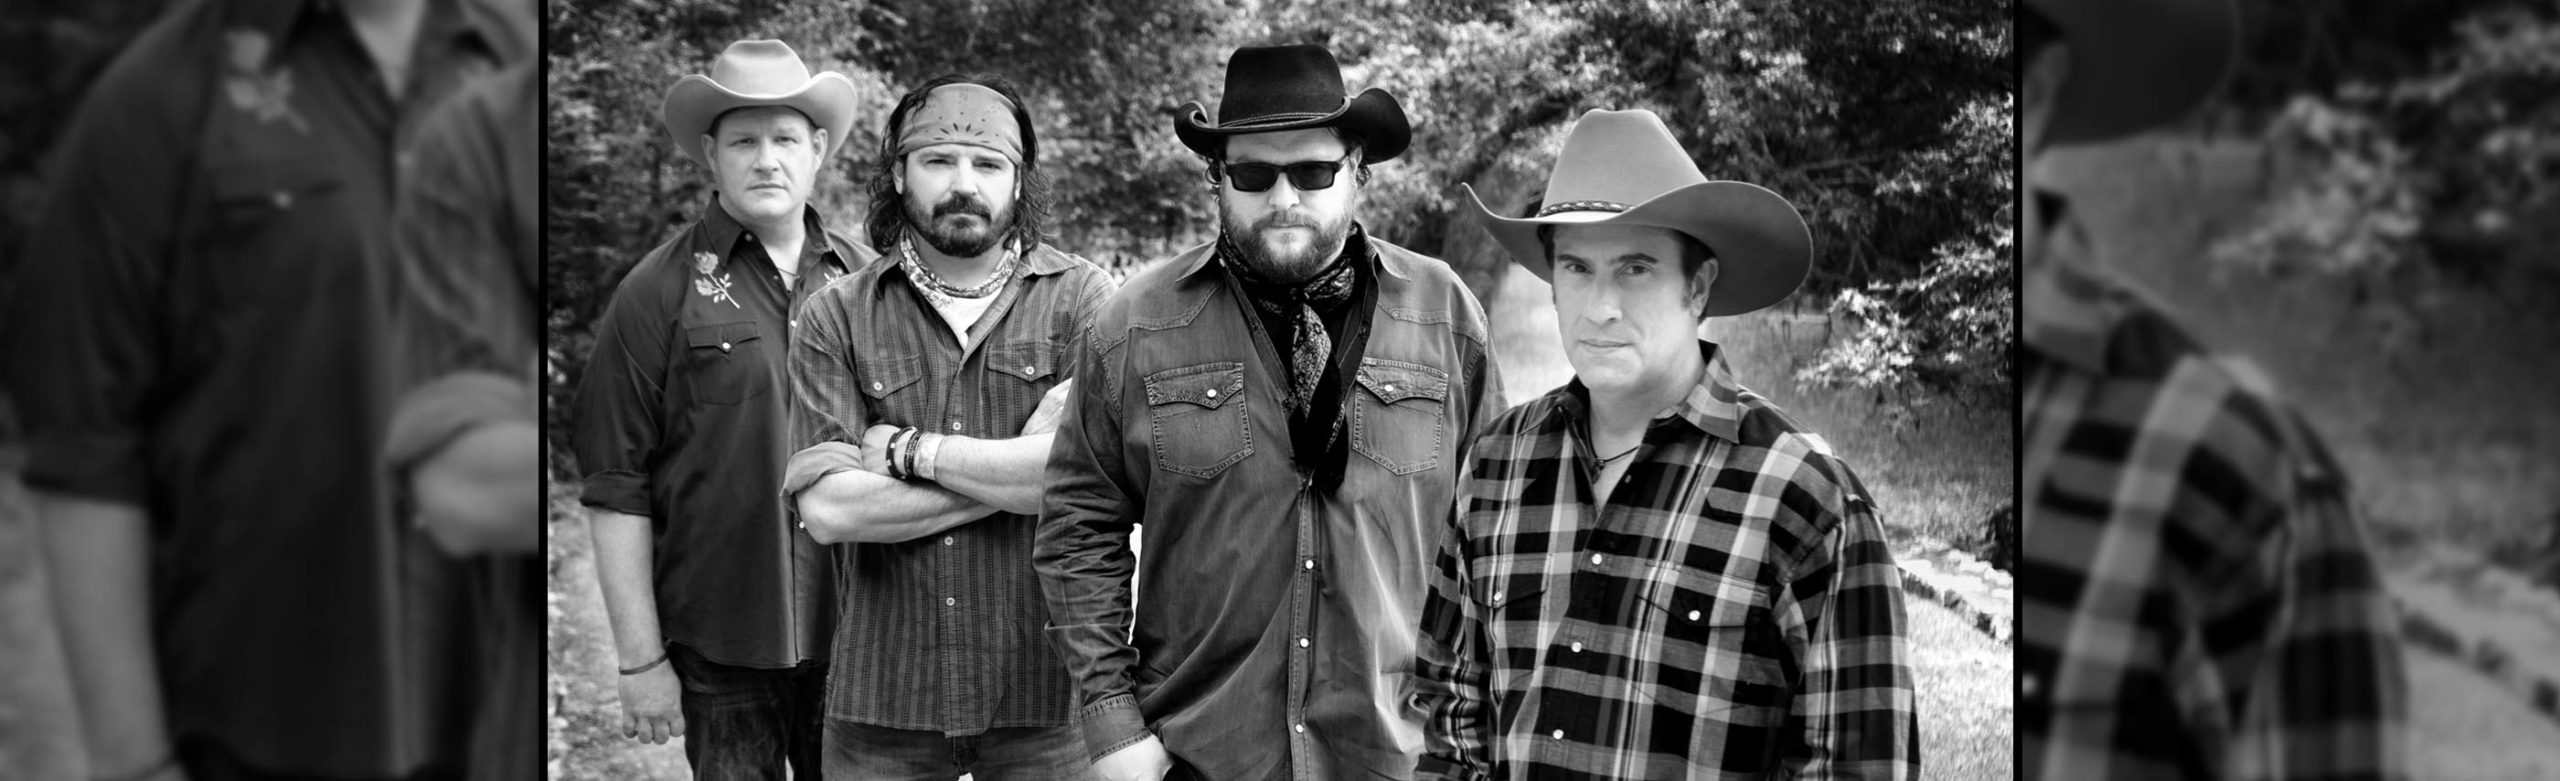 Reckless Kelly Confirm Concert in Bozeman Image